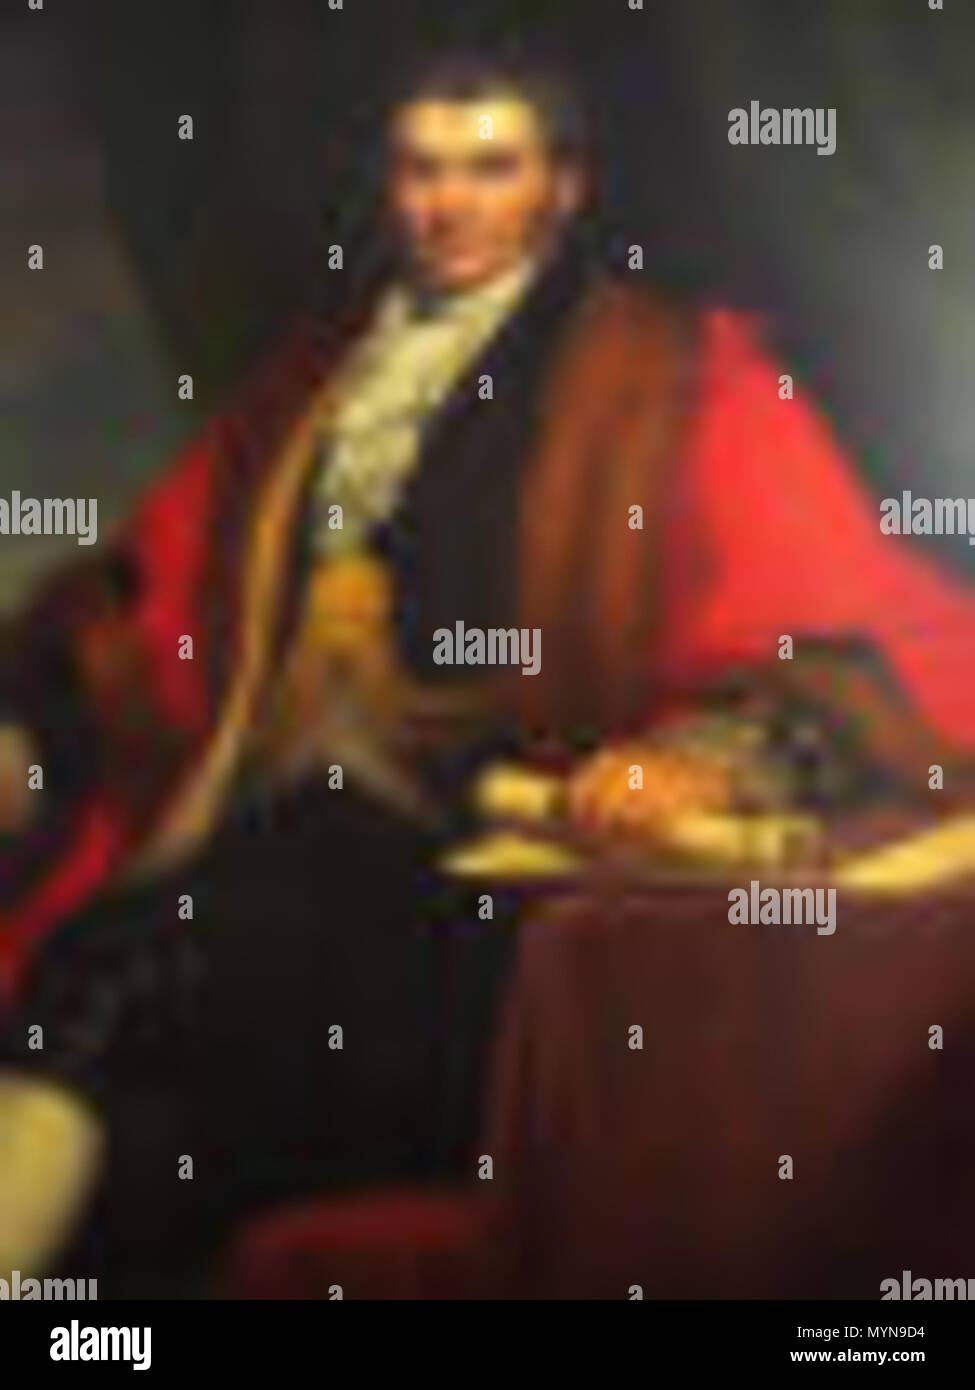 . English: Richard Peek was a tea merchant in Liverpool and Londo - born and died in Devon. In the picture he is shown in his regalia as Sheriff of London. The painting is still in the Peek family. 1833. Unknown 414 Richard Peek, Sheriff of London Stock Photo